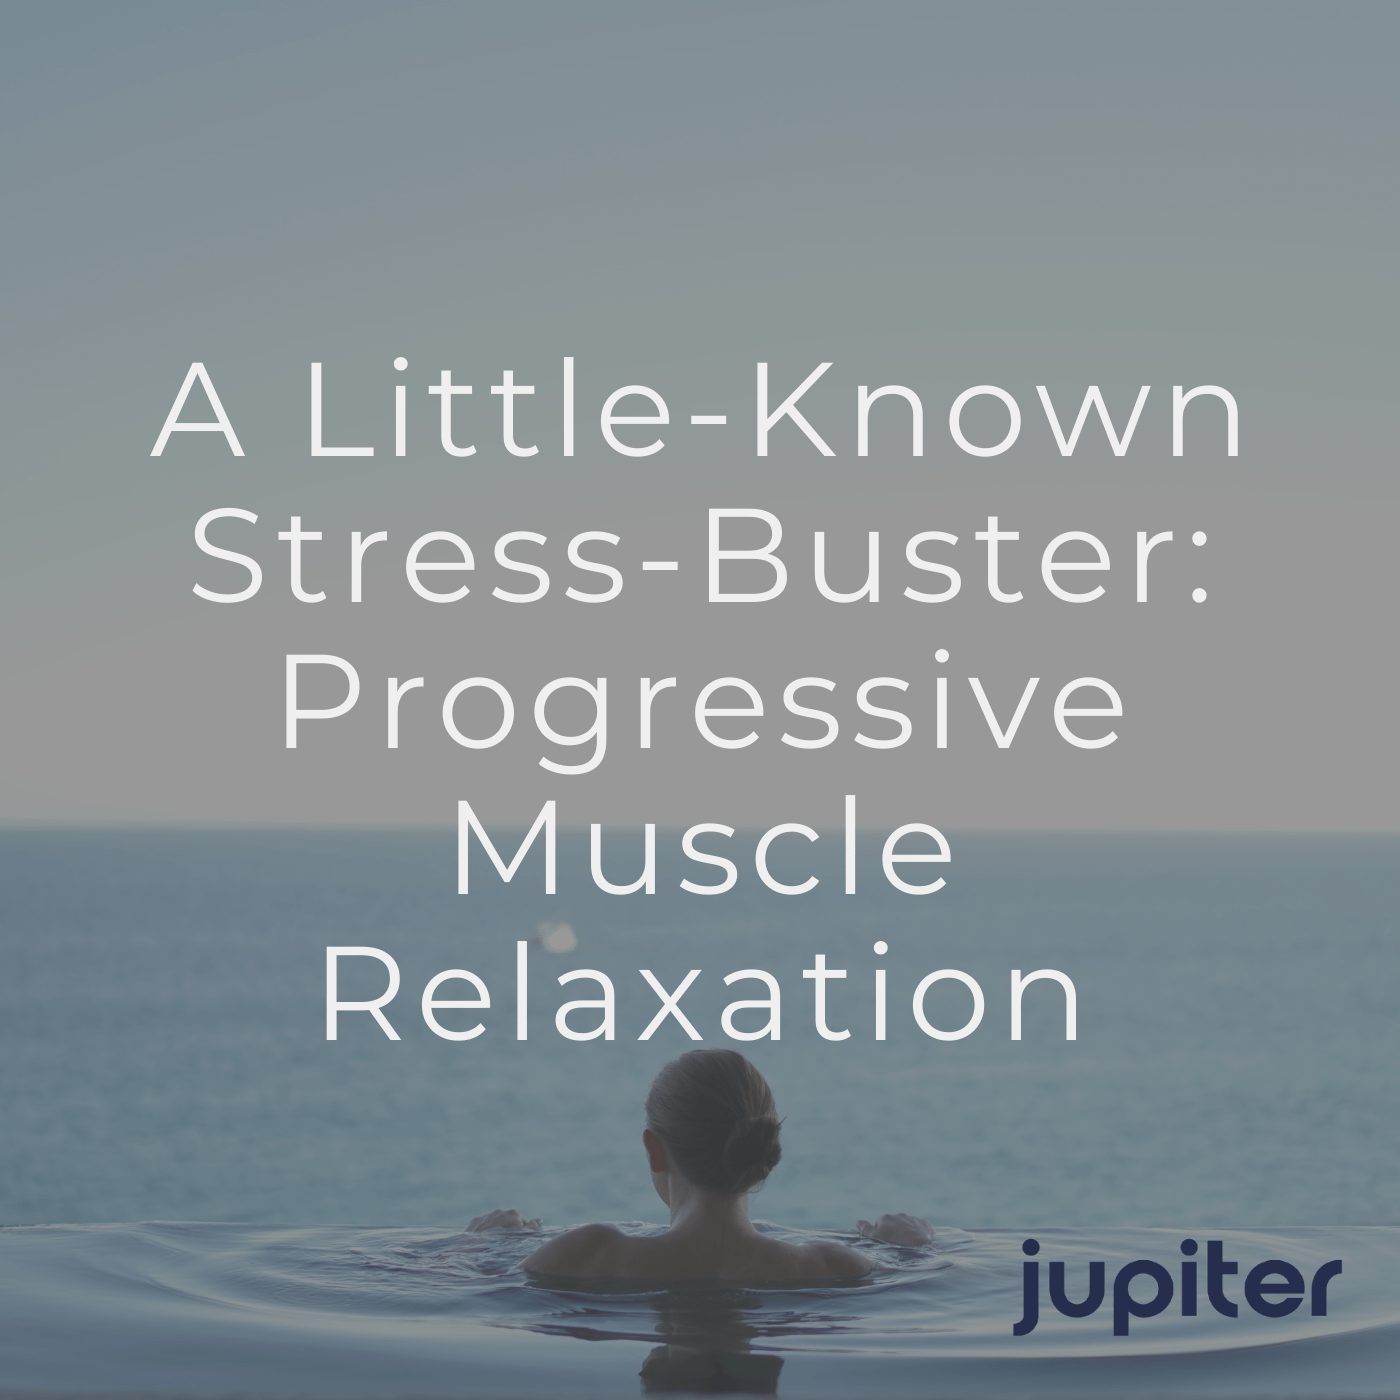 A Little-Known Stress-Buster: Progressive Muscle Relaxation